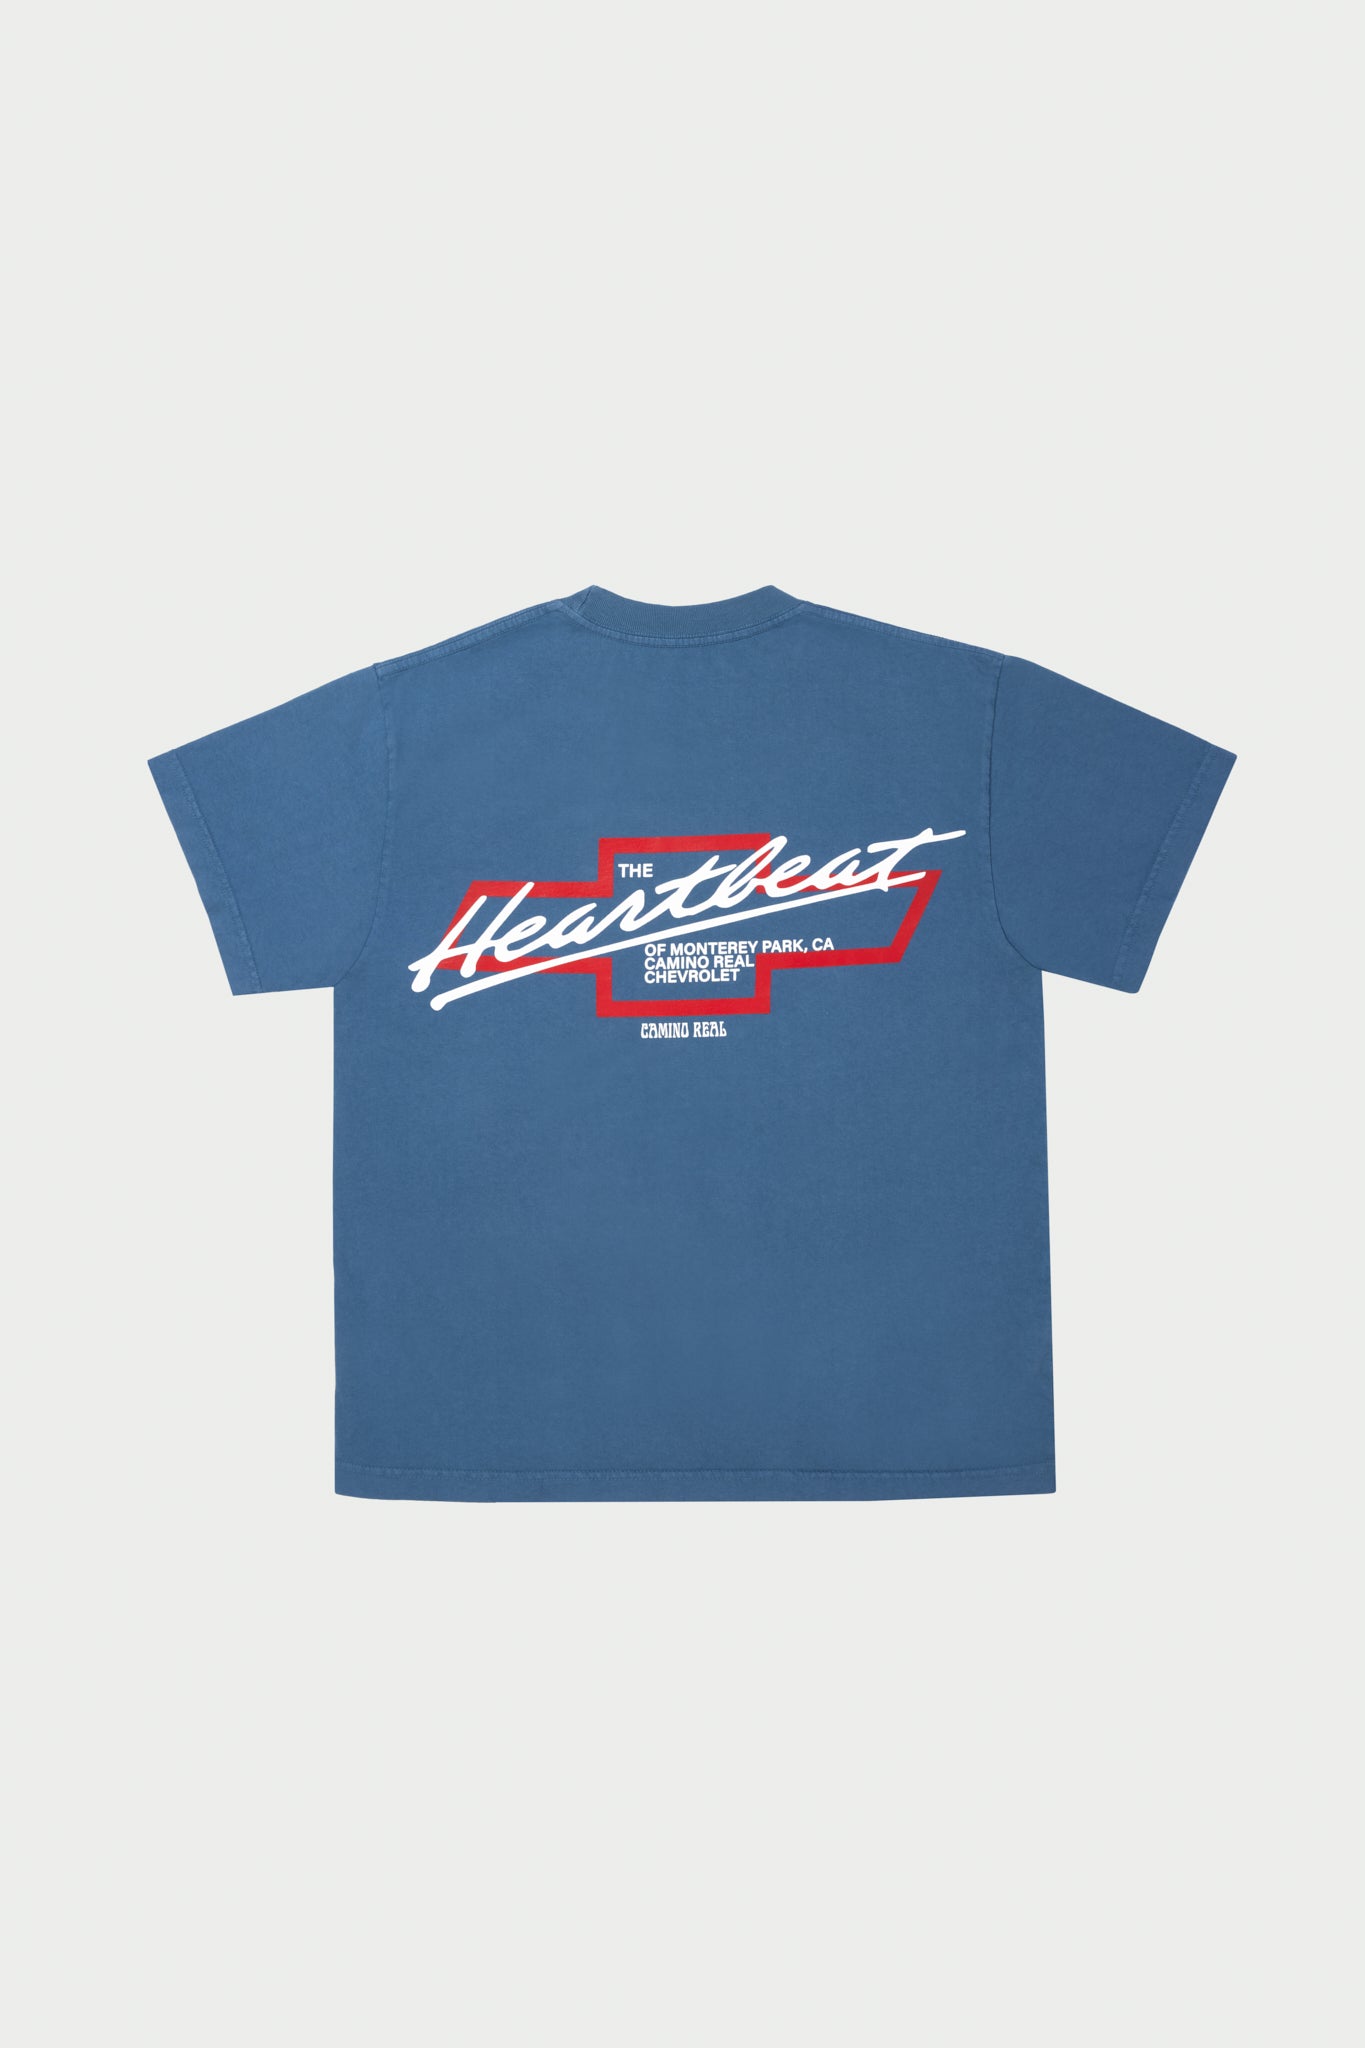 HEARTBEAT OF MONTEREY PARK CHEVY TEE (Vintage Blue)